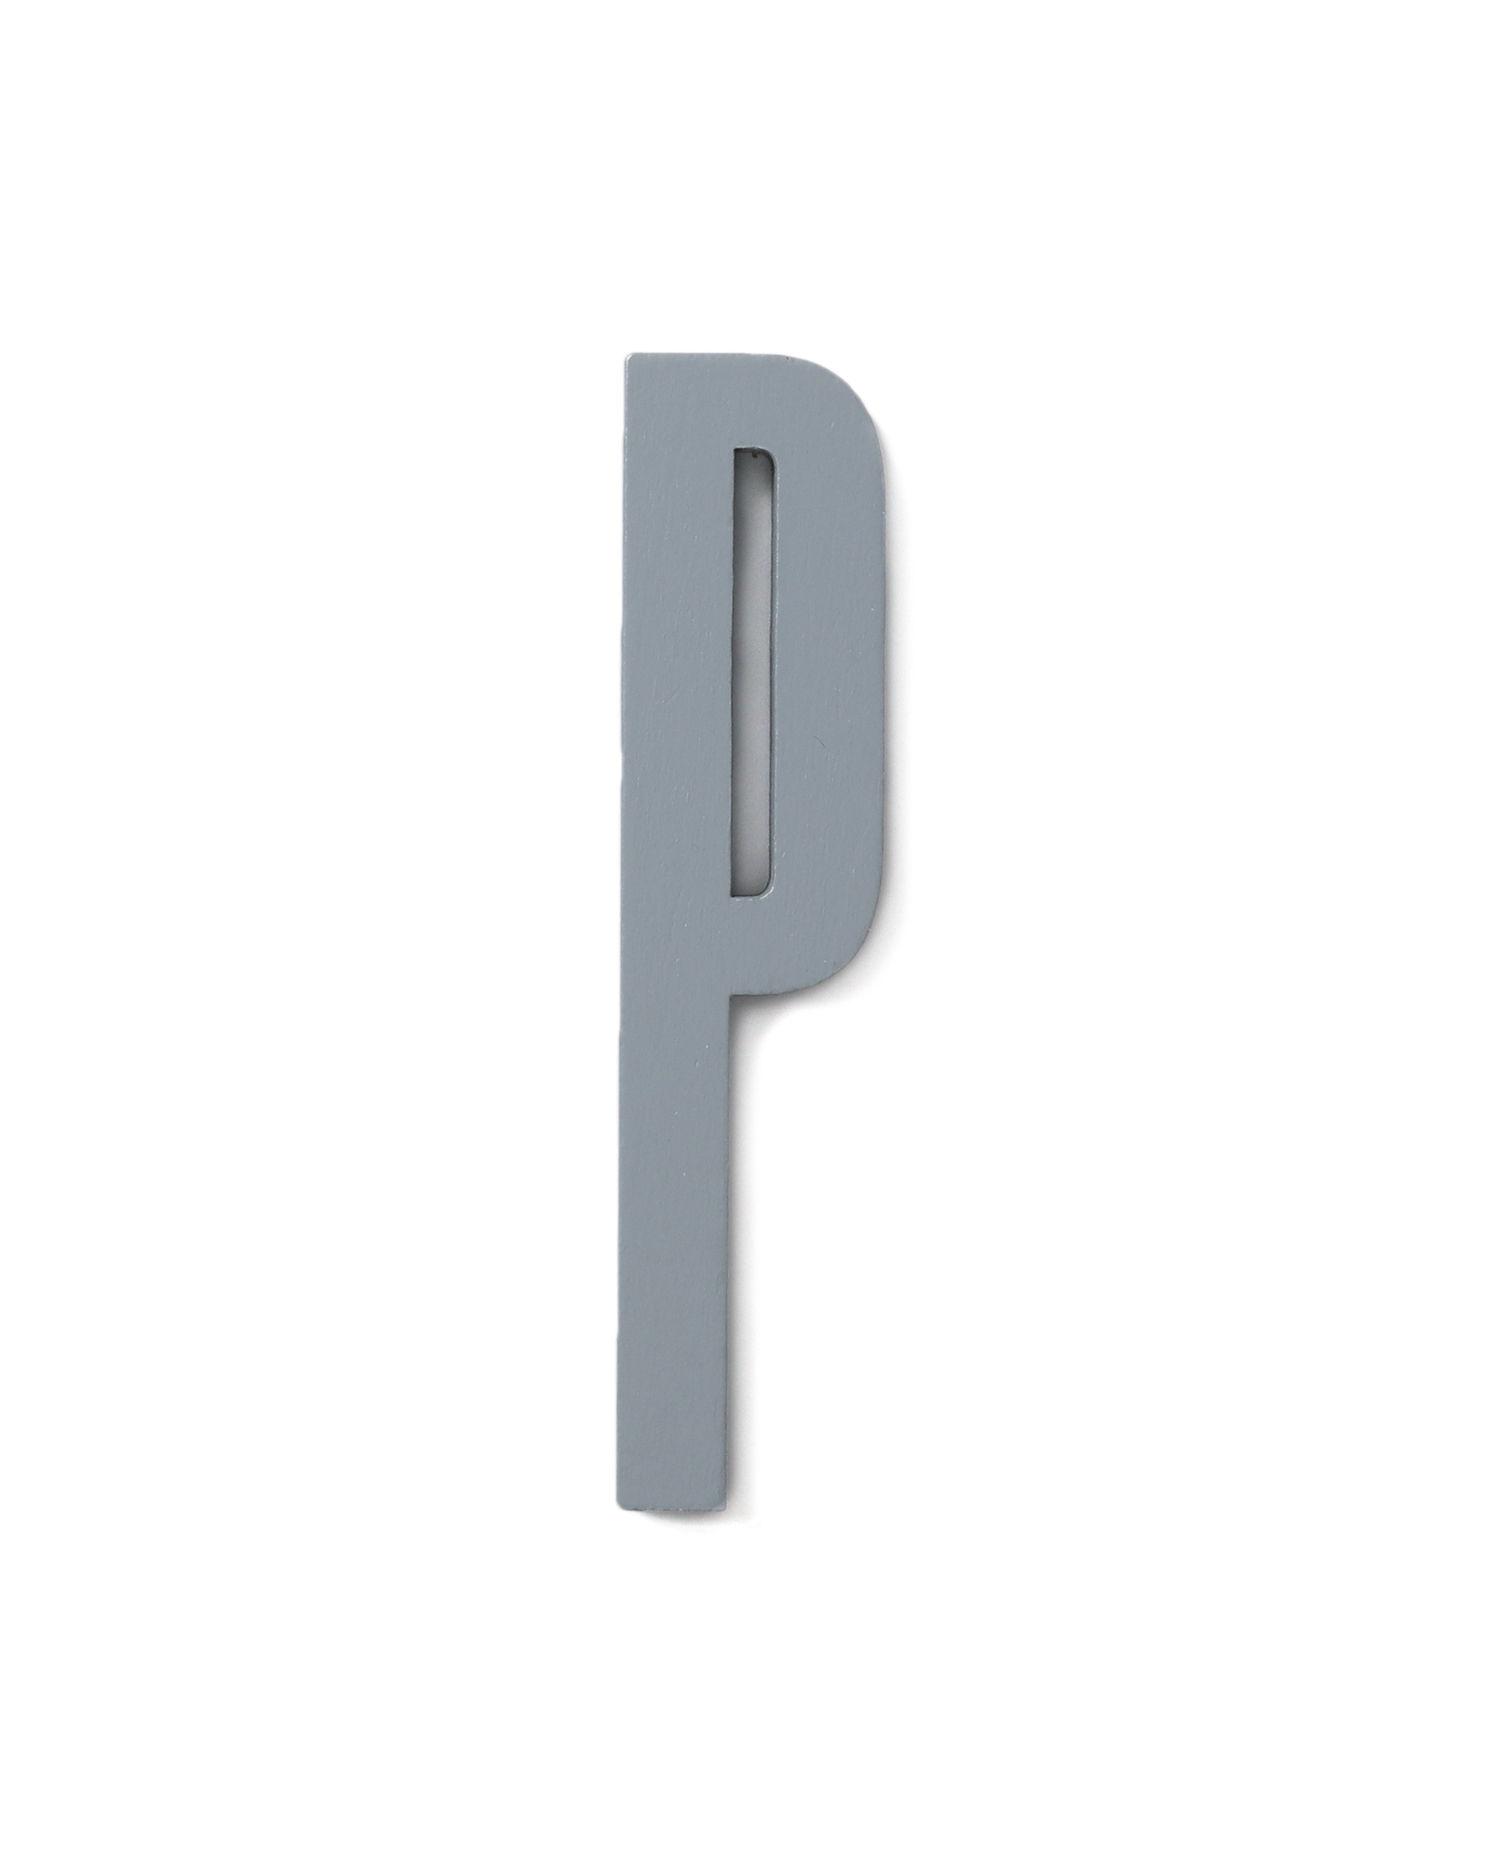 Letter P display by DESIGN LETTERS